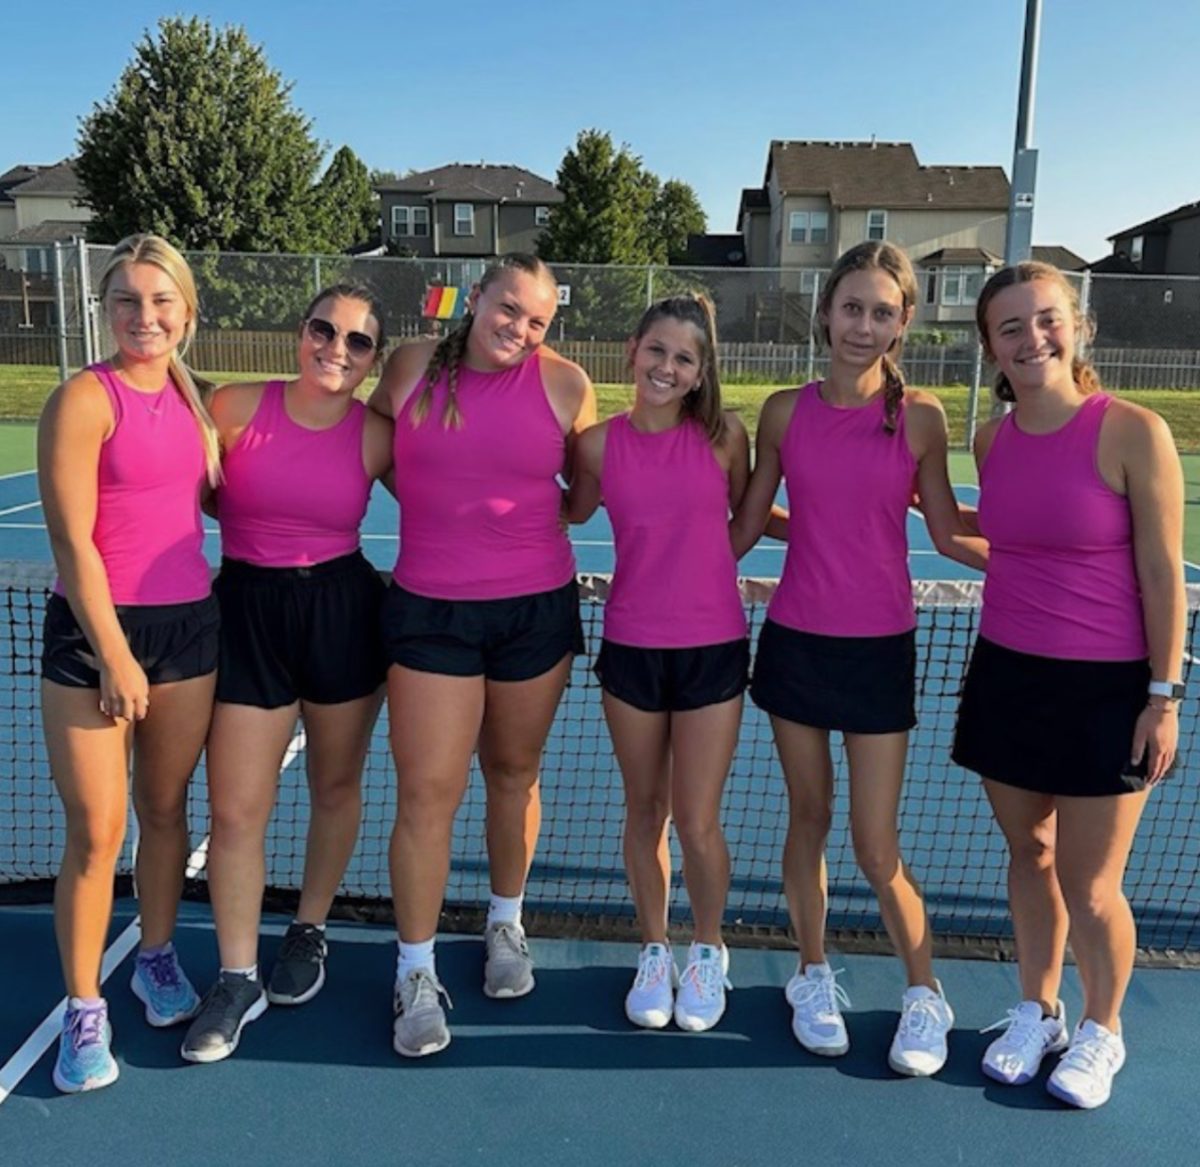 Top six JV tennis players, Kaylyn Gilliland, 11, Blaire Sommer, 12, Avery Feeback, 12, Ella Crabtree, 10, Alana Smith, 10, and Katelin Falen, 12 travel to Mill Valley to compete. They play all day to finish as a team in third place (Photo provided by E. Crabtree).